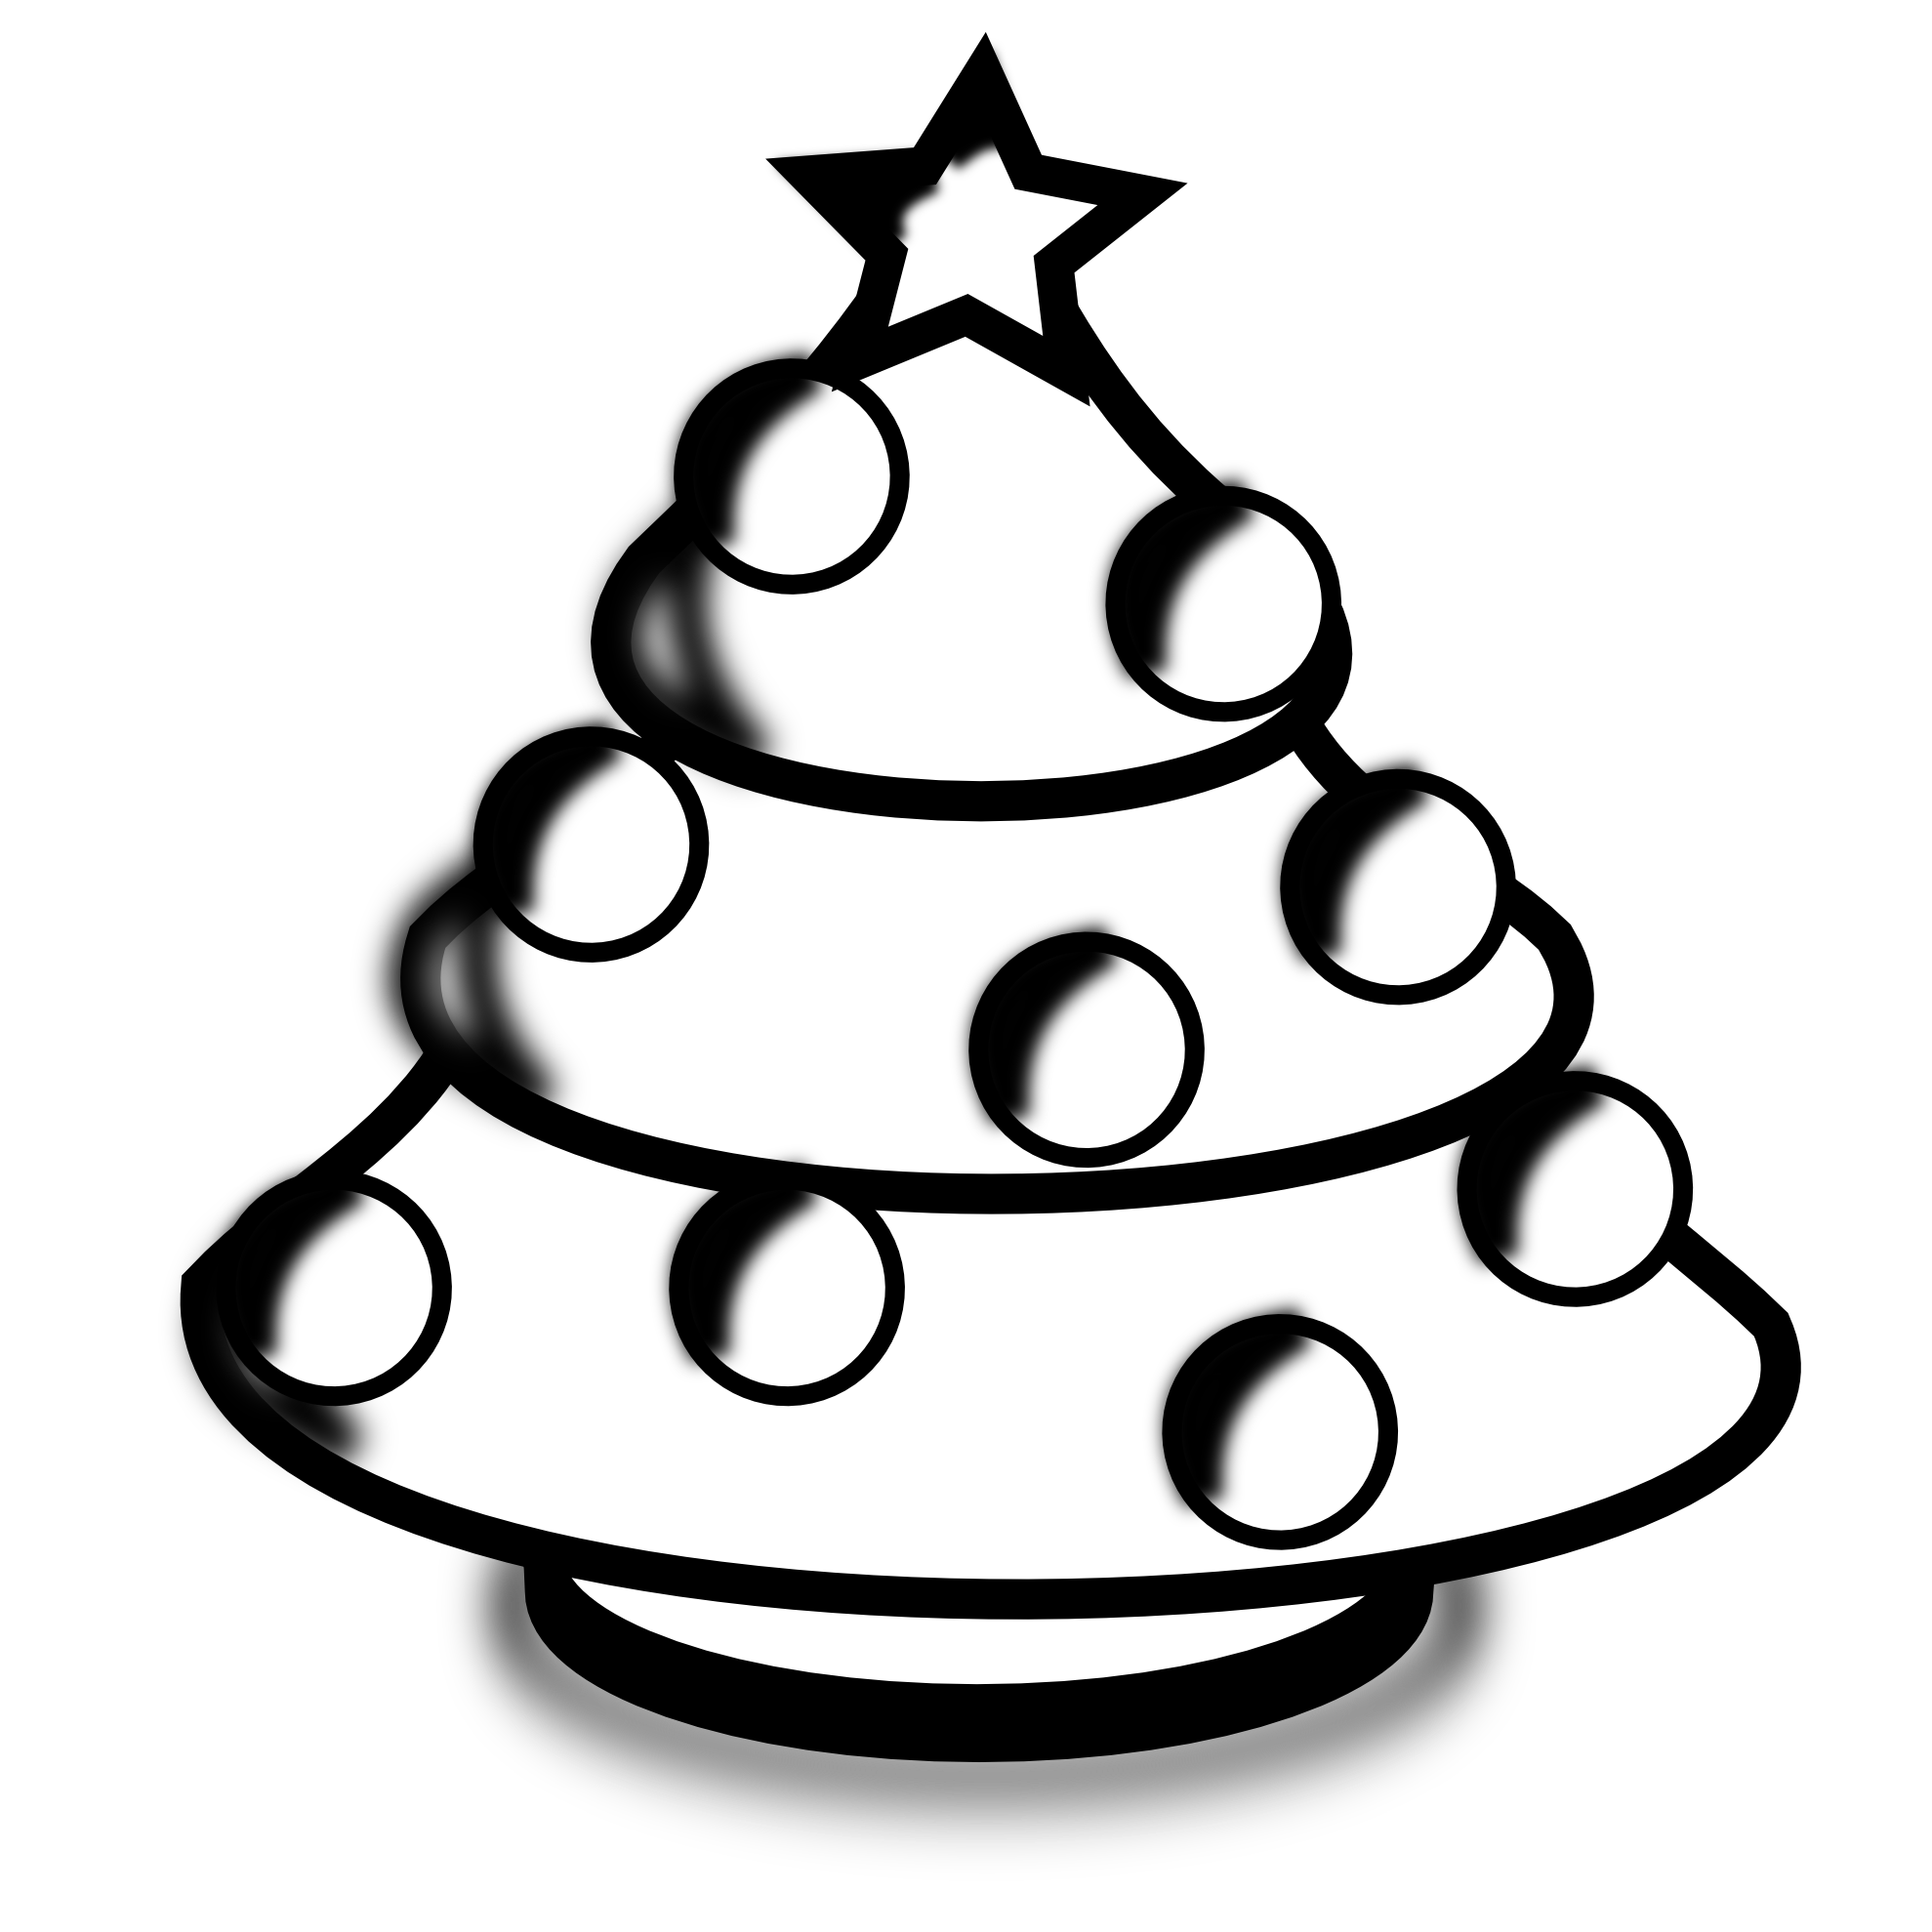 Pix For > Black And White Clipart Tree